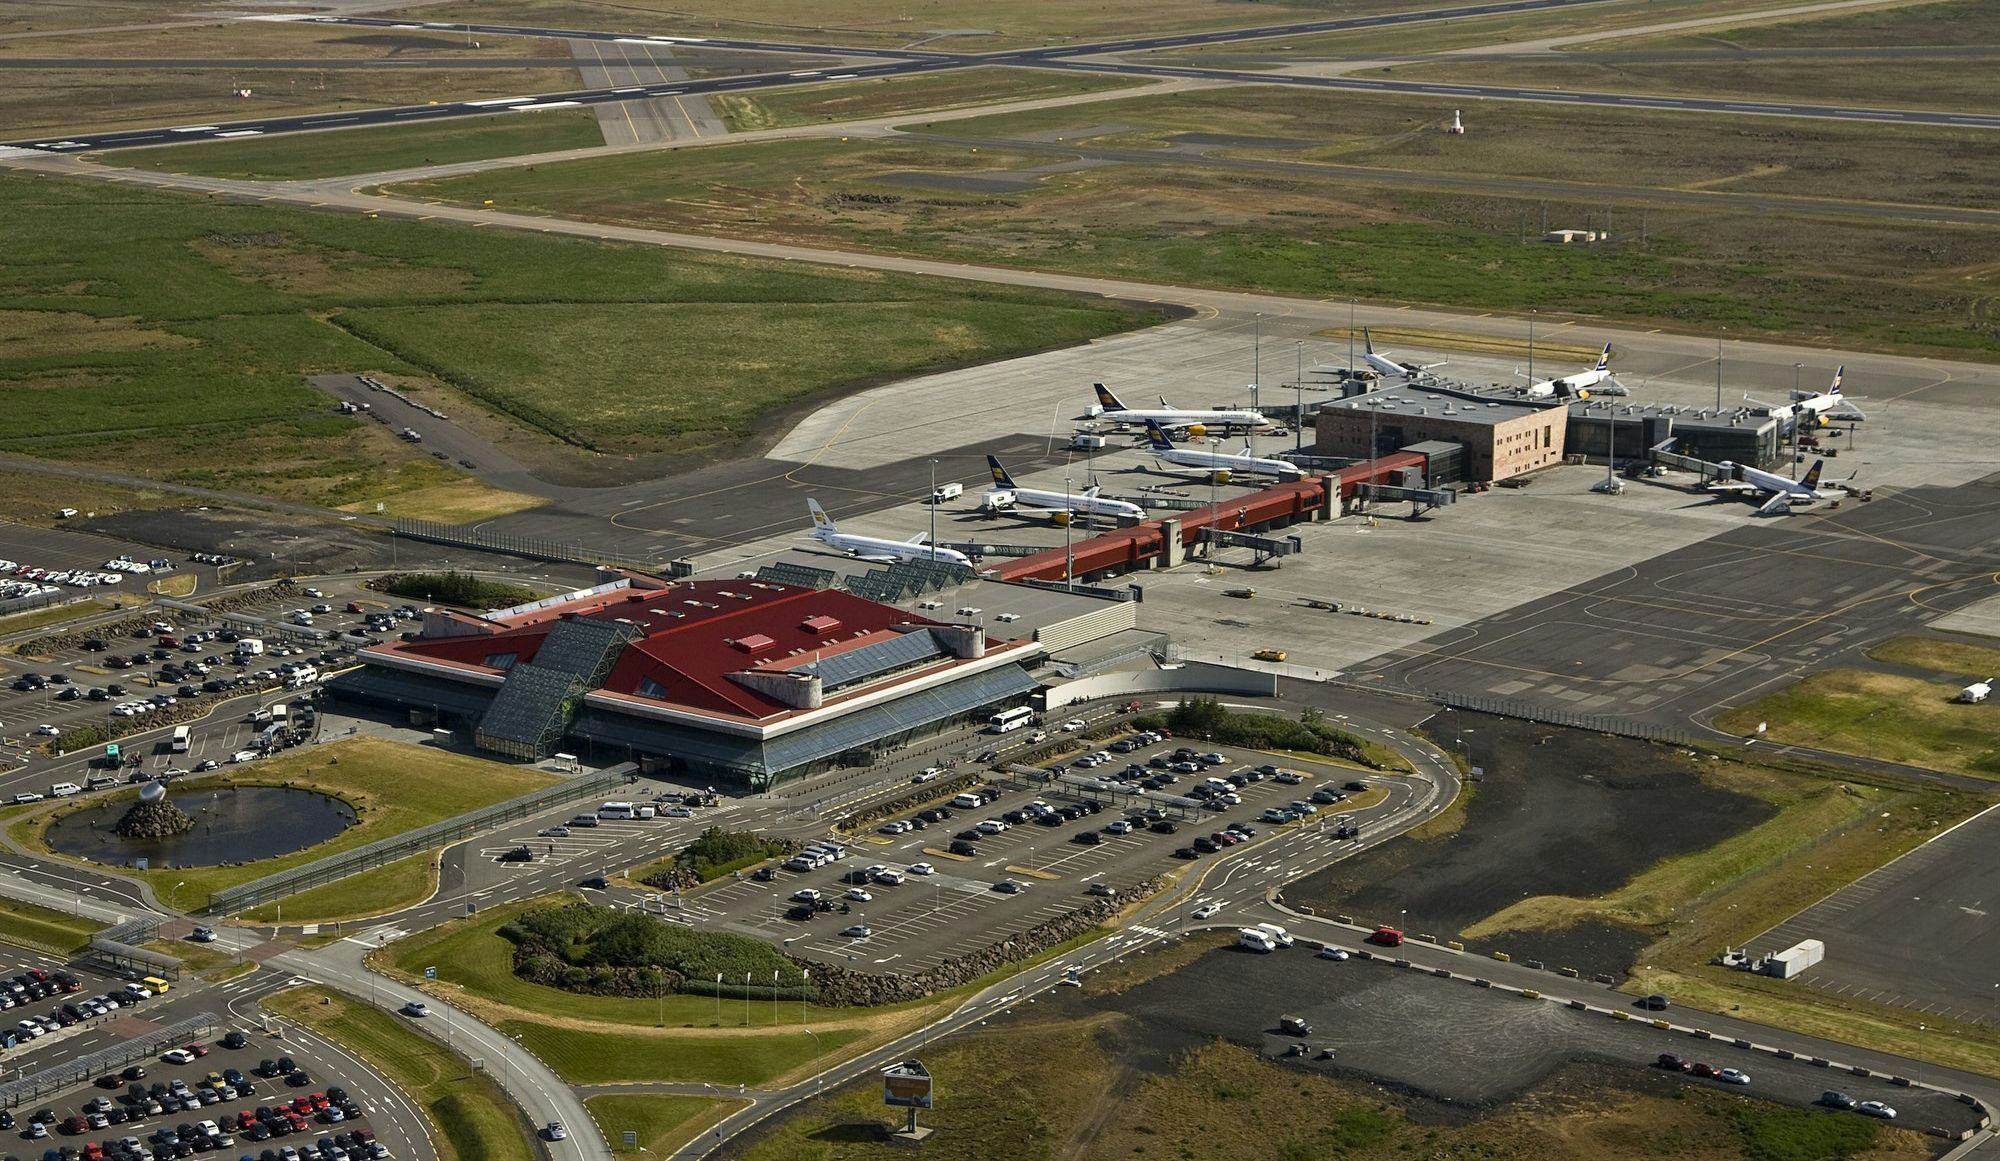 Aerial photo of an airport showcasing runway, aircrafts and airport building